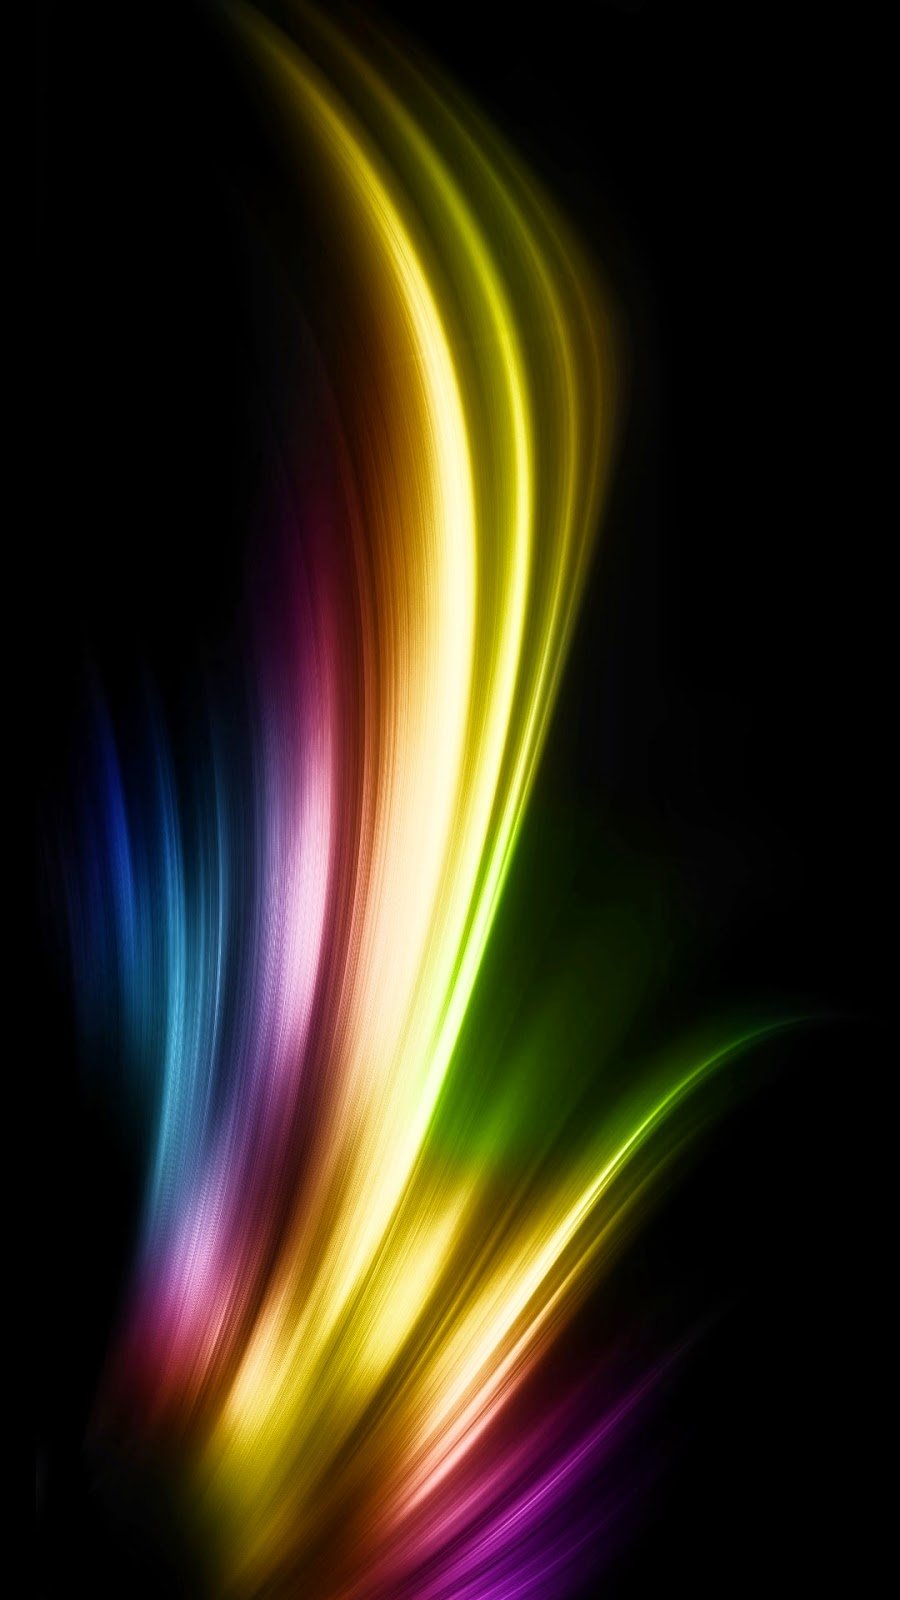 Free Download Be Linspired Iphone 6 Wallpaper Backgrounds 900x1600 For Your Desktop Mobile Tablet Explore 50 Free Iphone 6 Plus Wallpaper Iphone 6s Plus Wallpaper Hd Free Apple Iphone